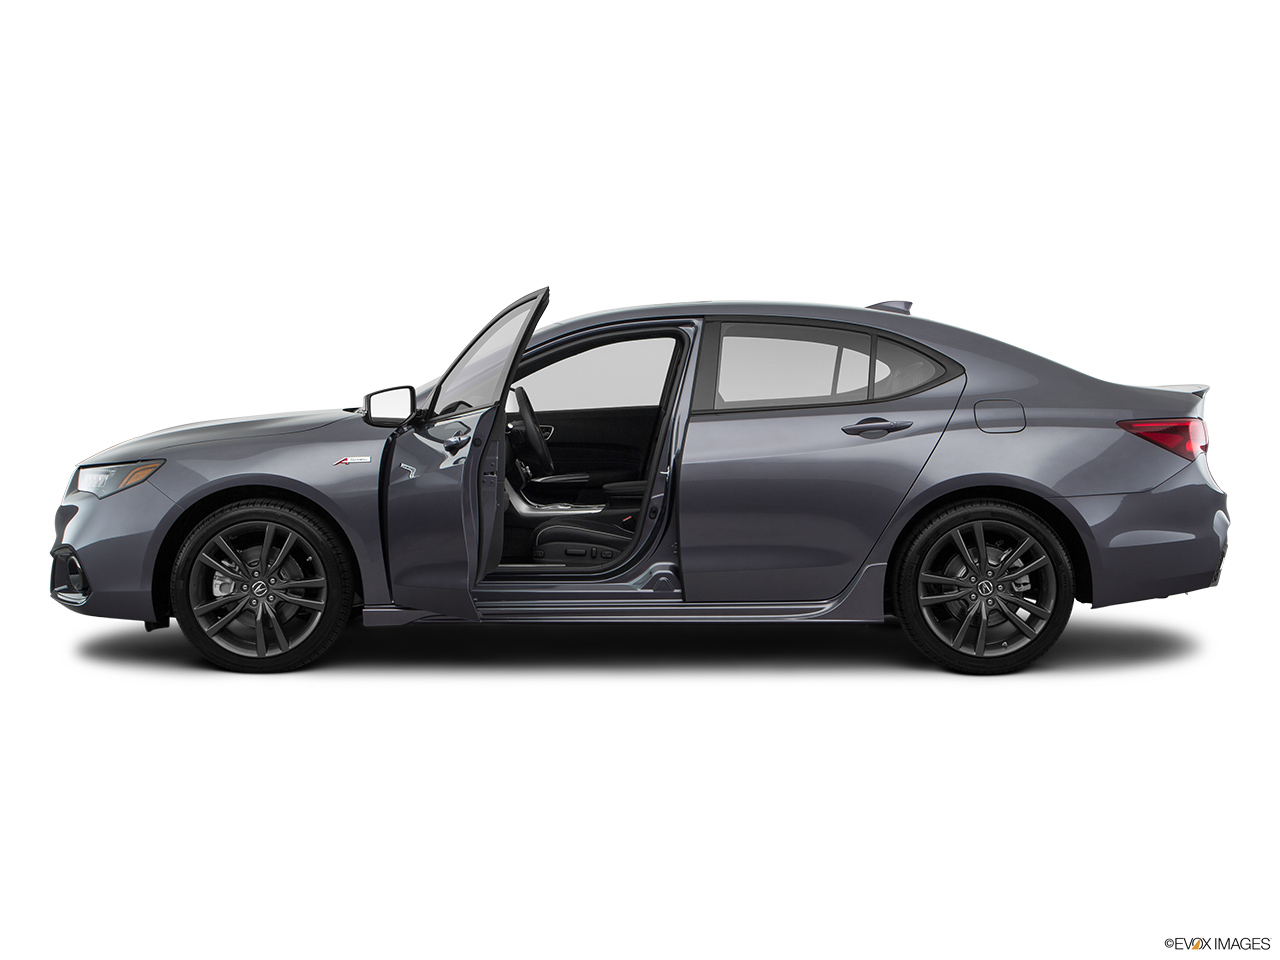 2019 Acura TLX 3.5L Driver's side profile with drivers side door open. 